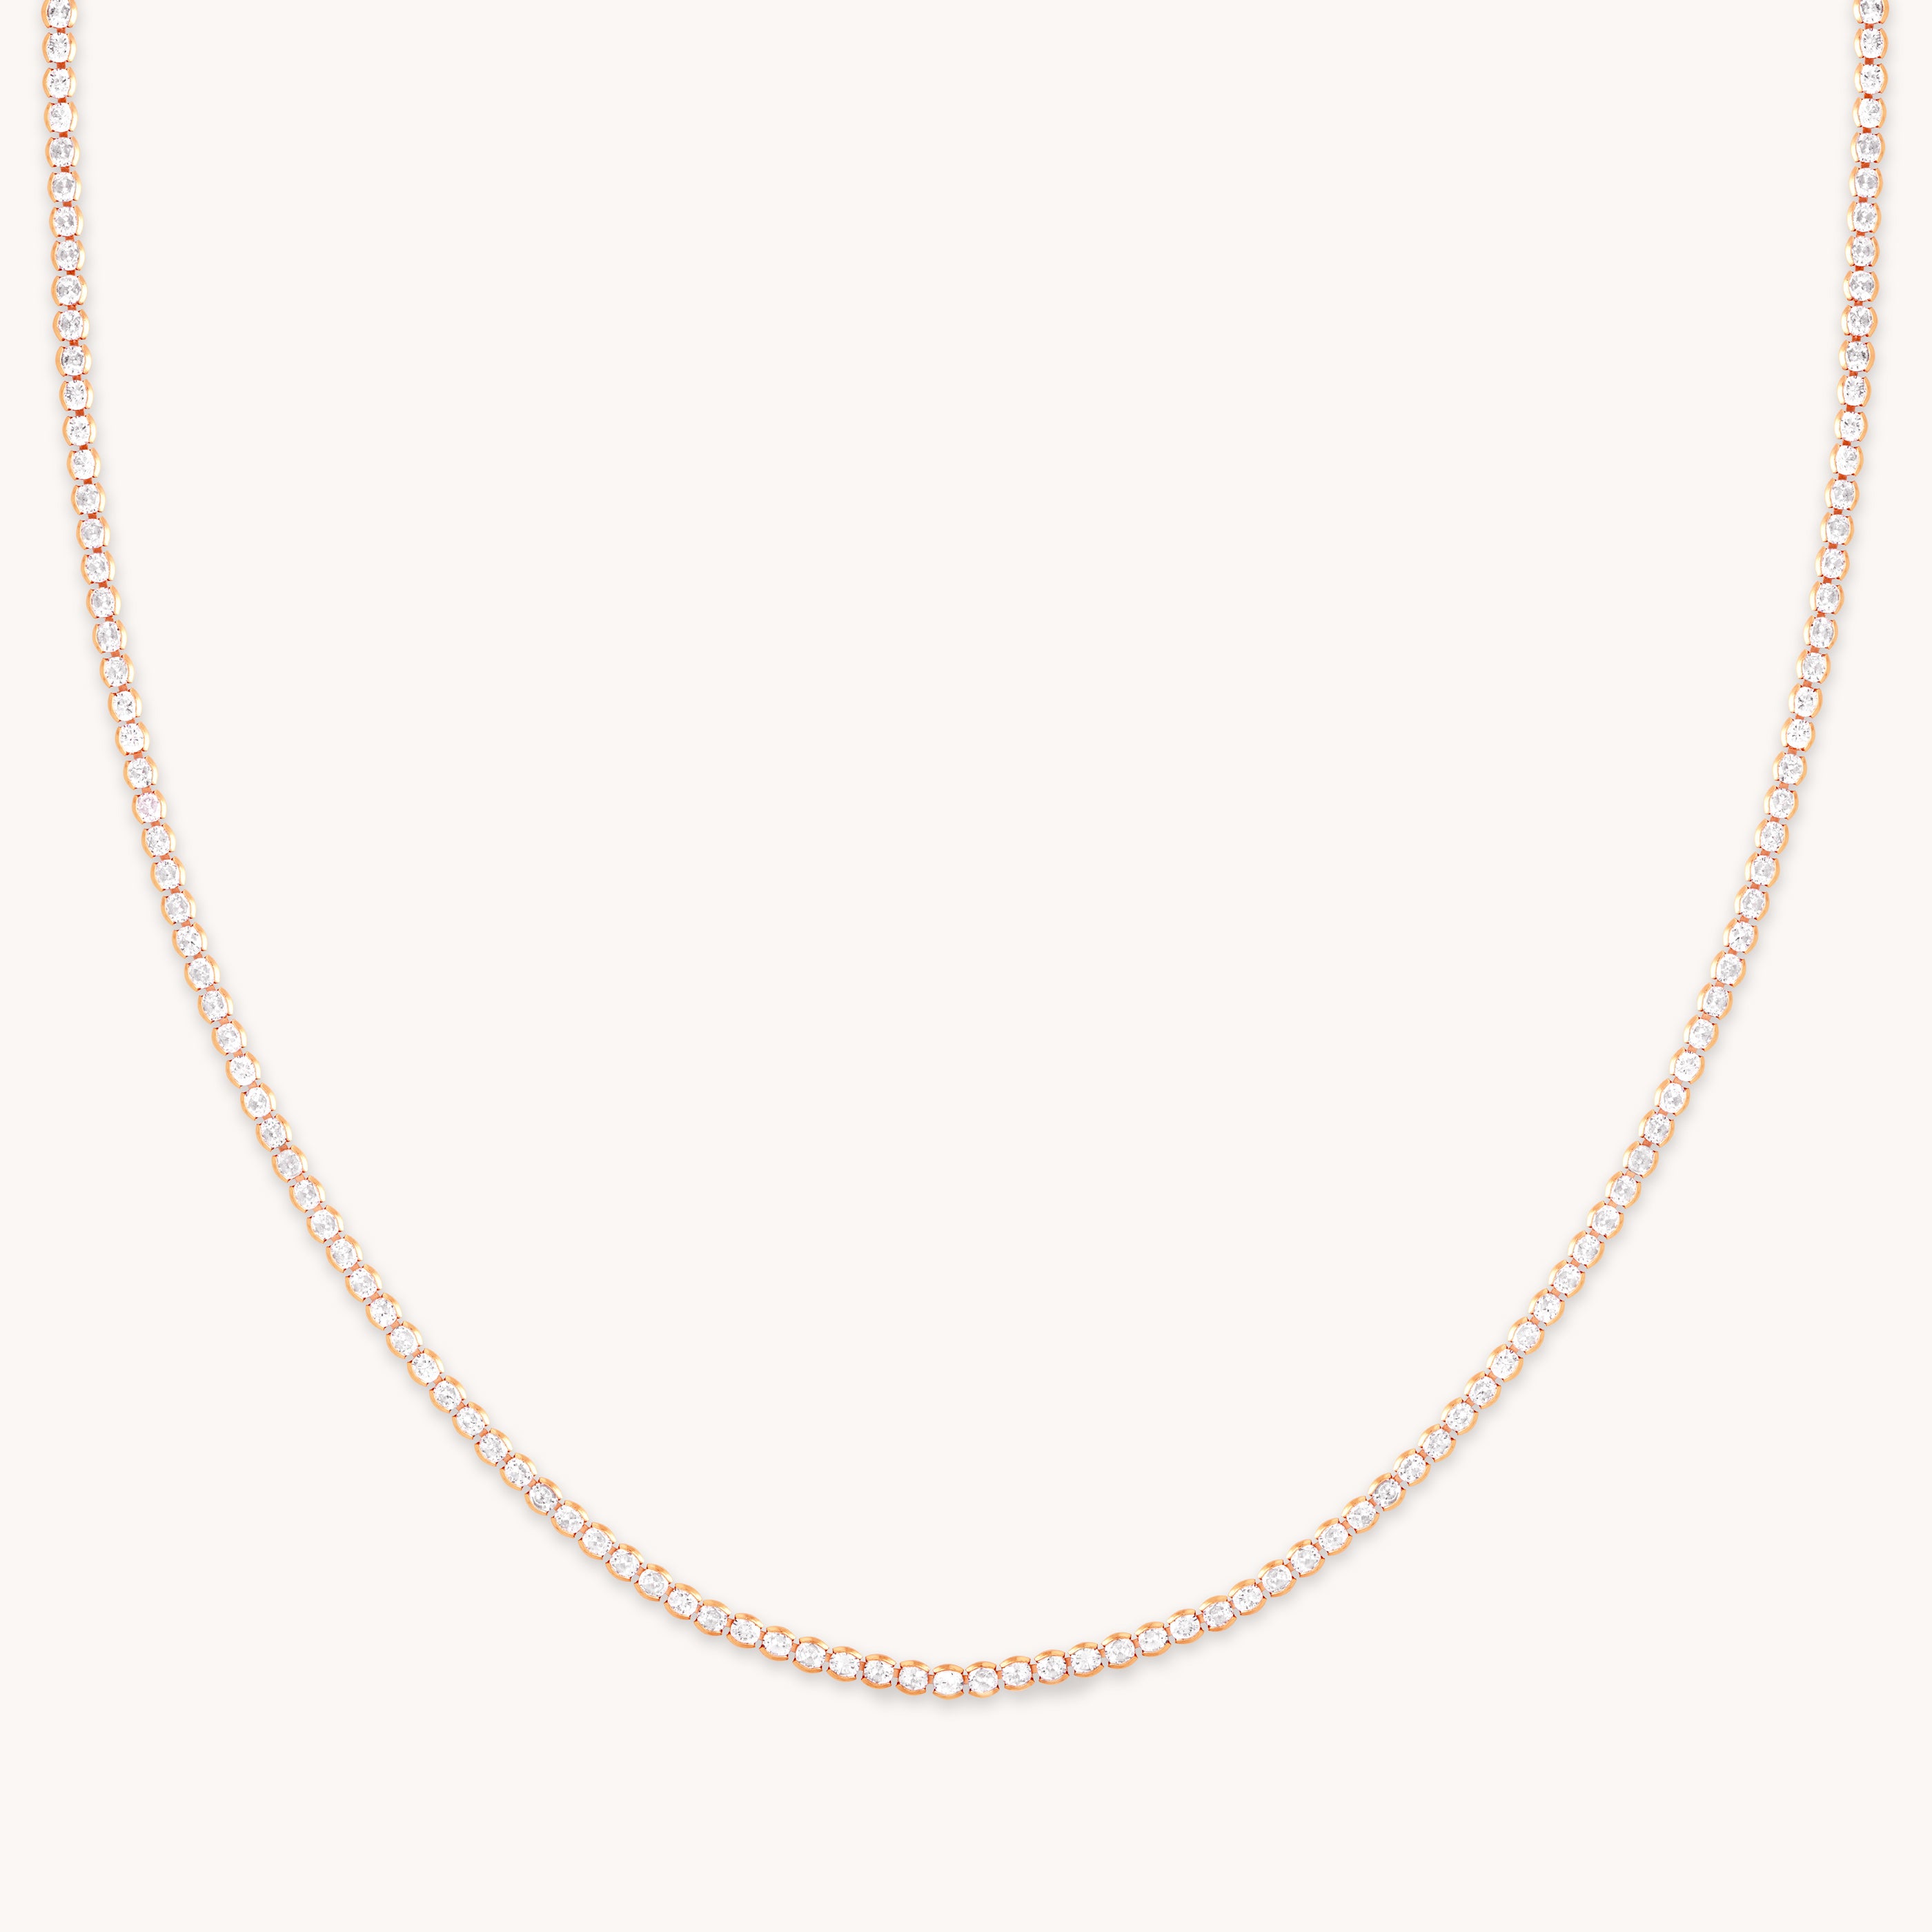 Gleam Tennis Chain Necklace in Rose Gold